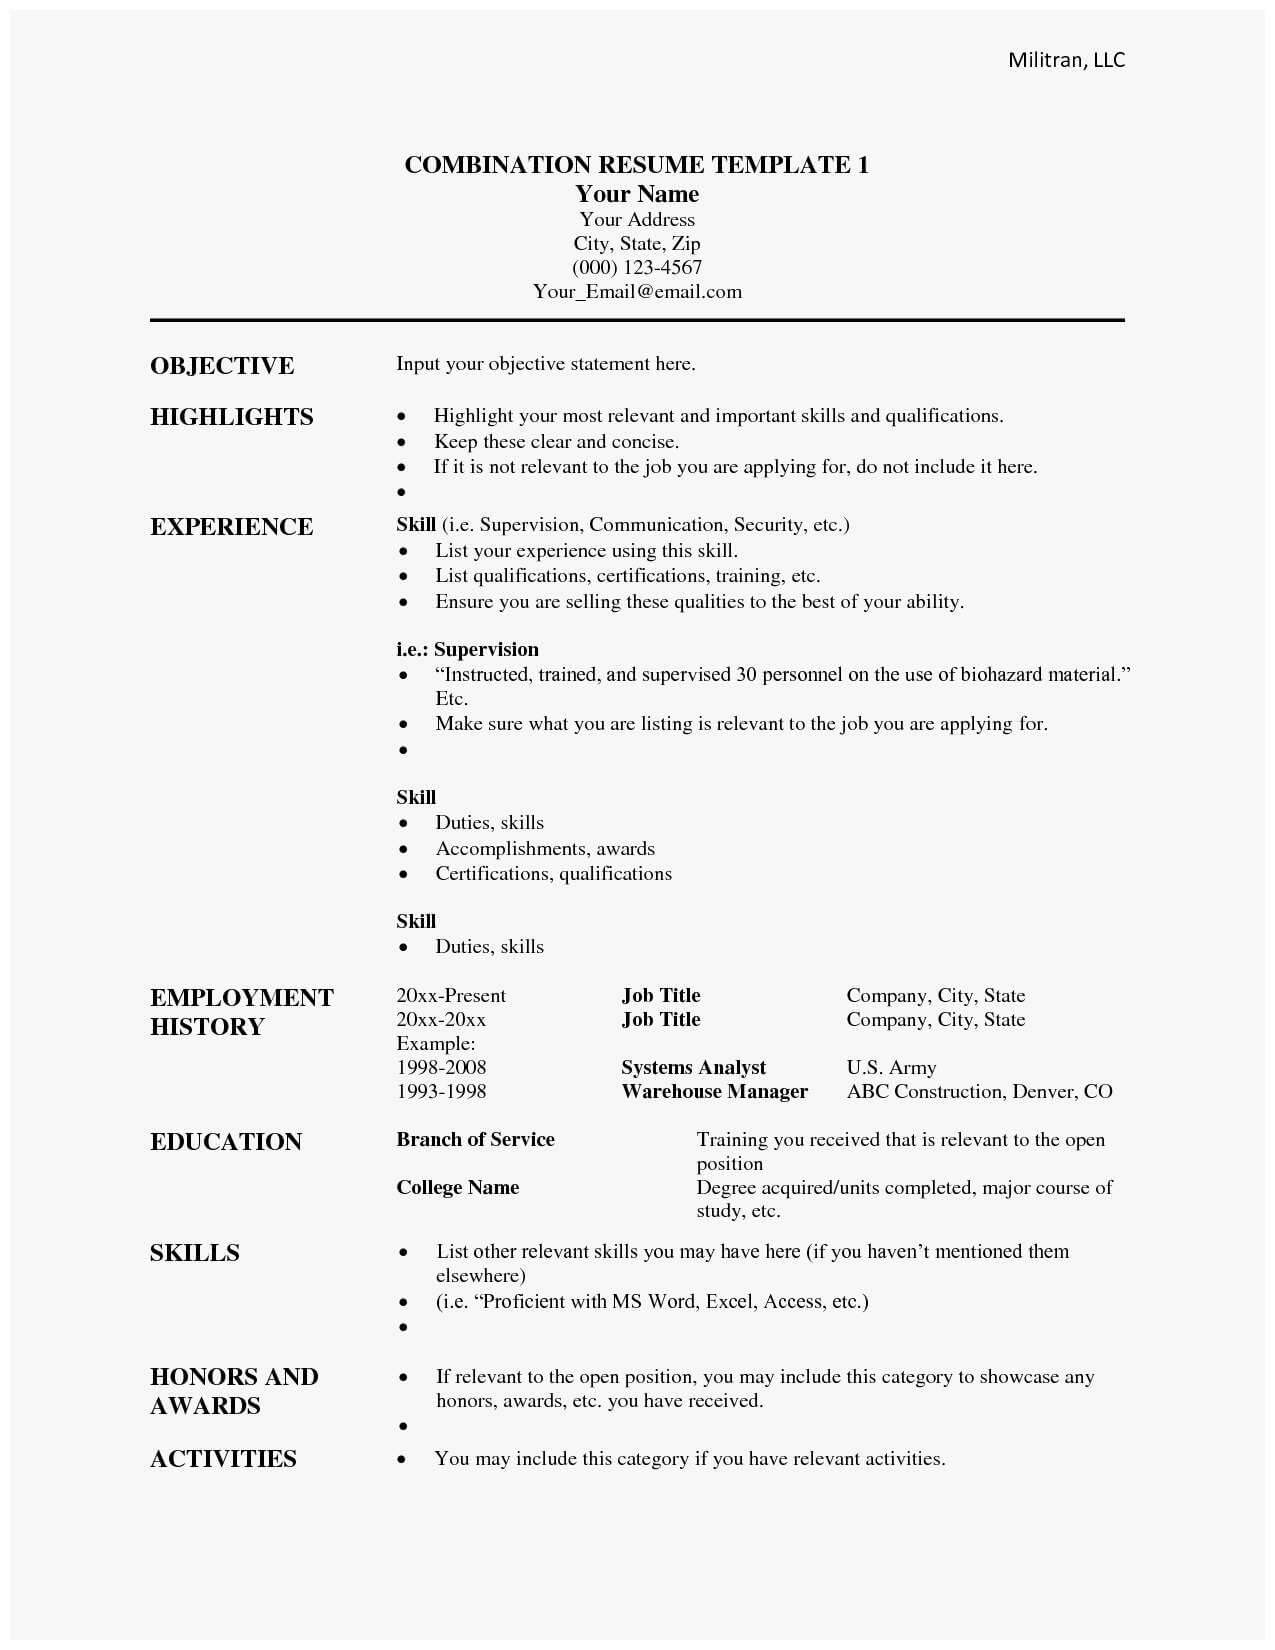 75 Admirable Stocks Of Combination Resume Sample | Best Of Intended For Combination Resume Template Word